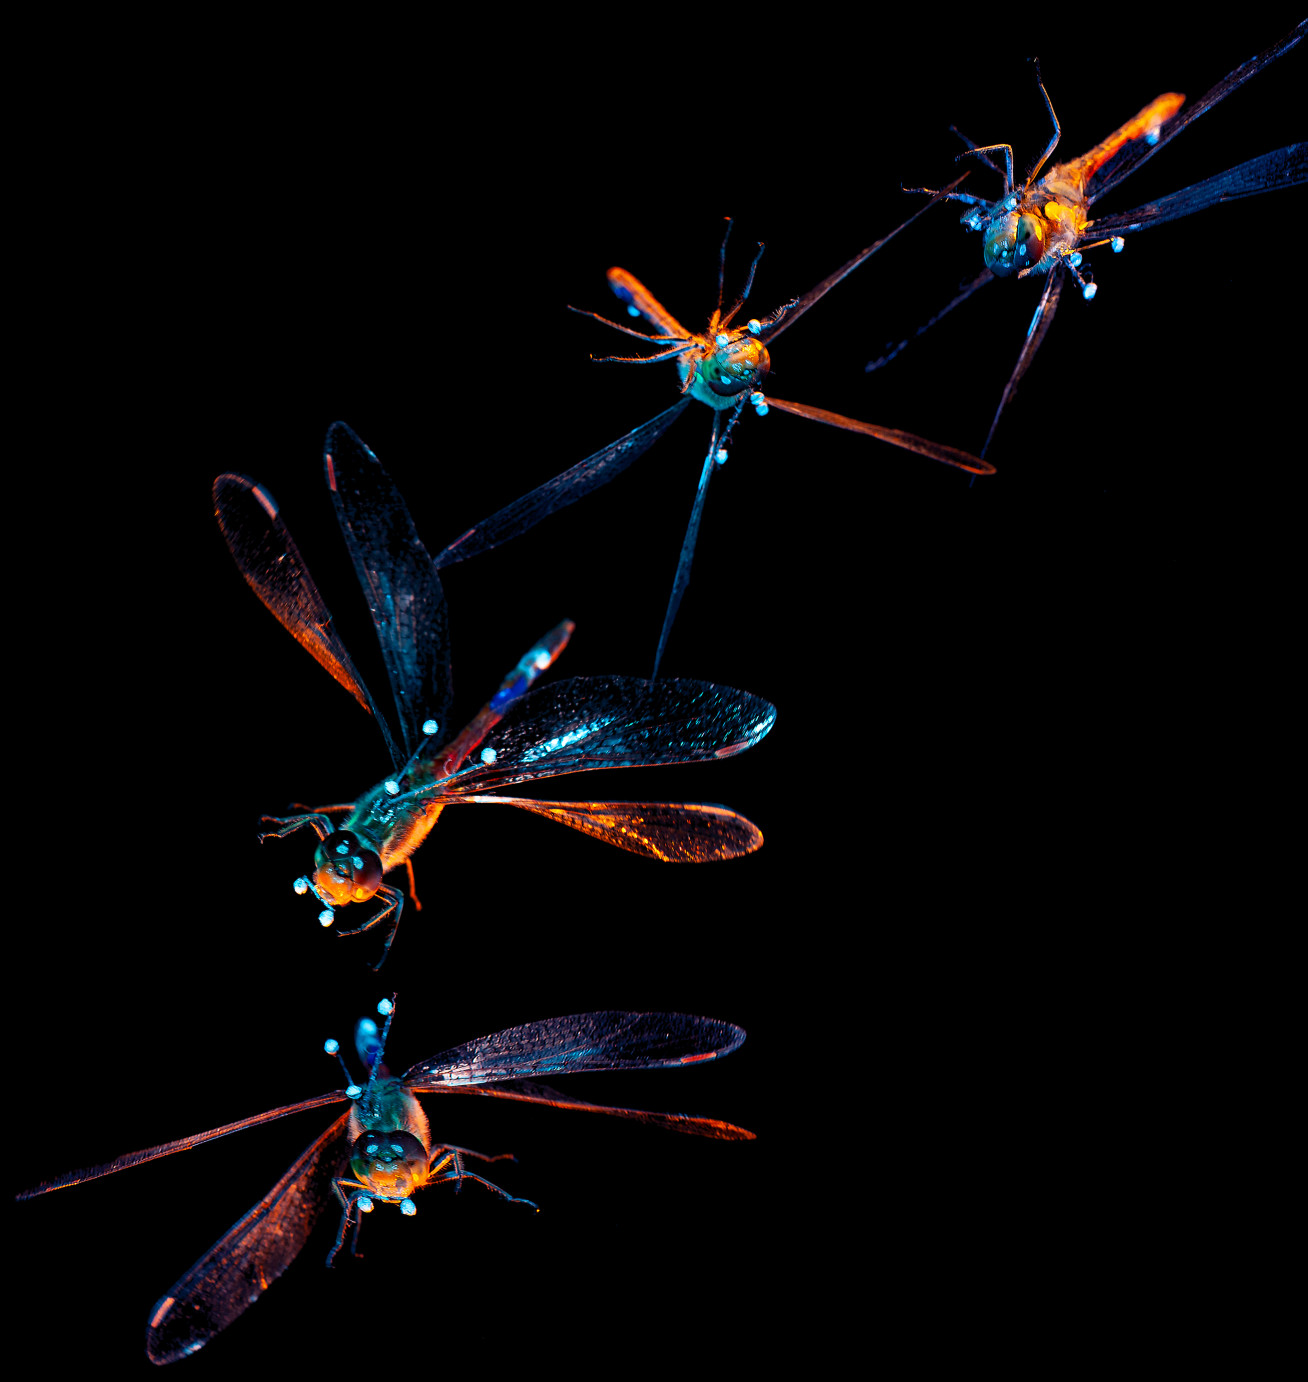 High-speed camera image of a dragonfly pitching backwards to right itself from an upside-down position